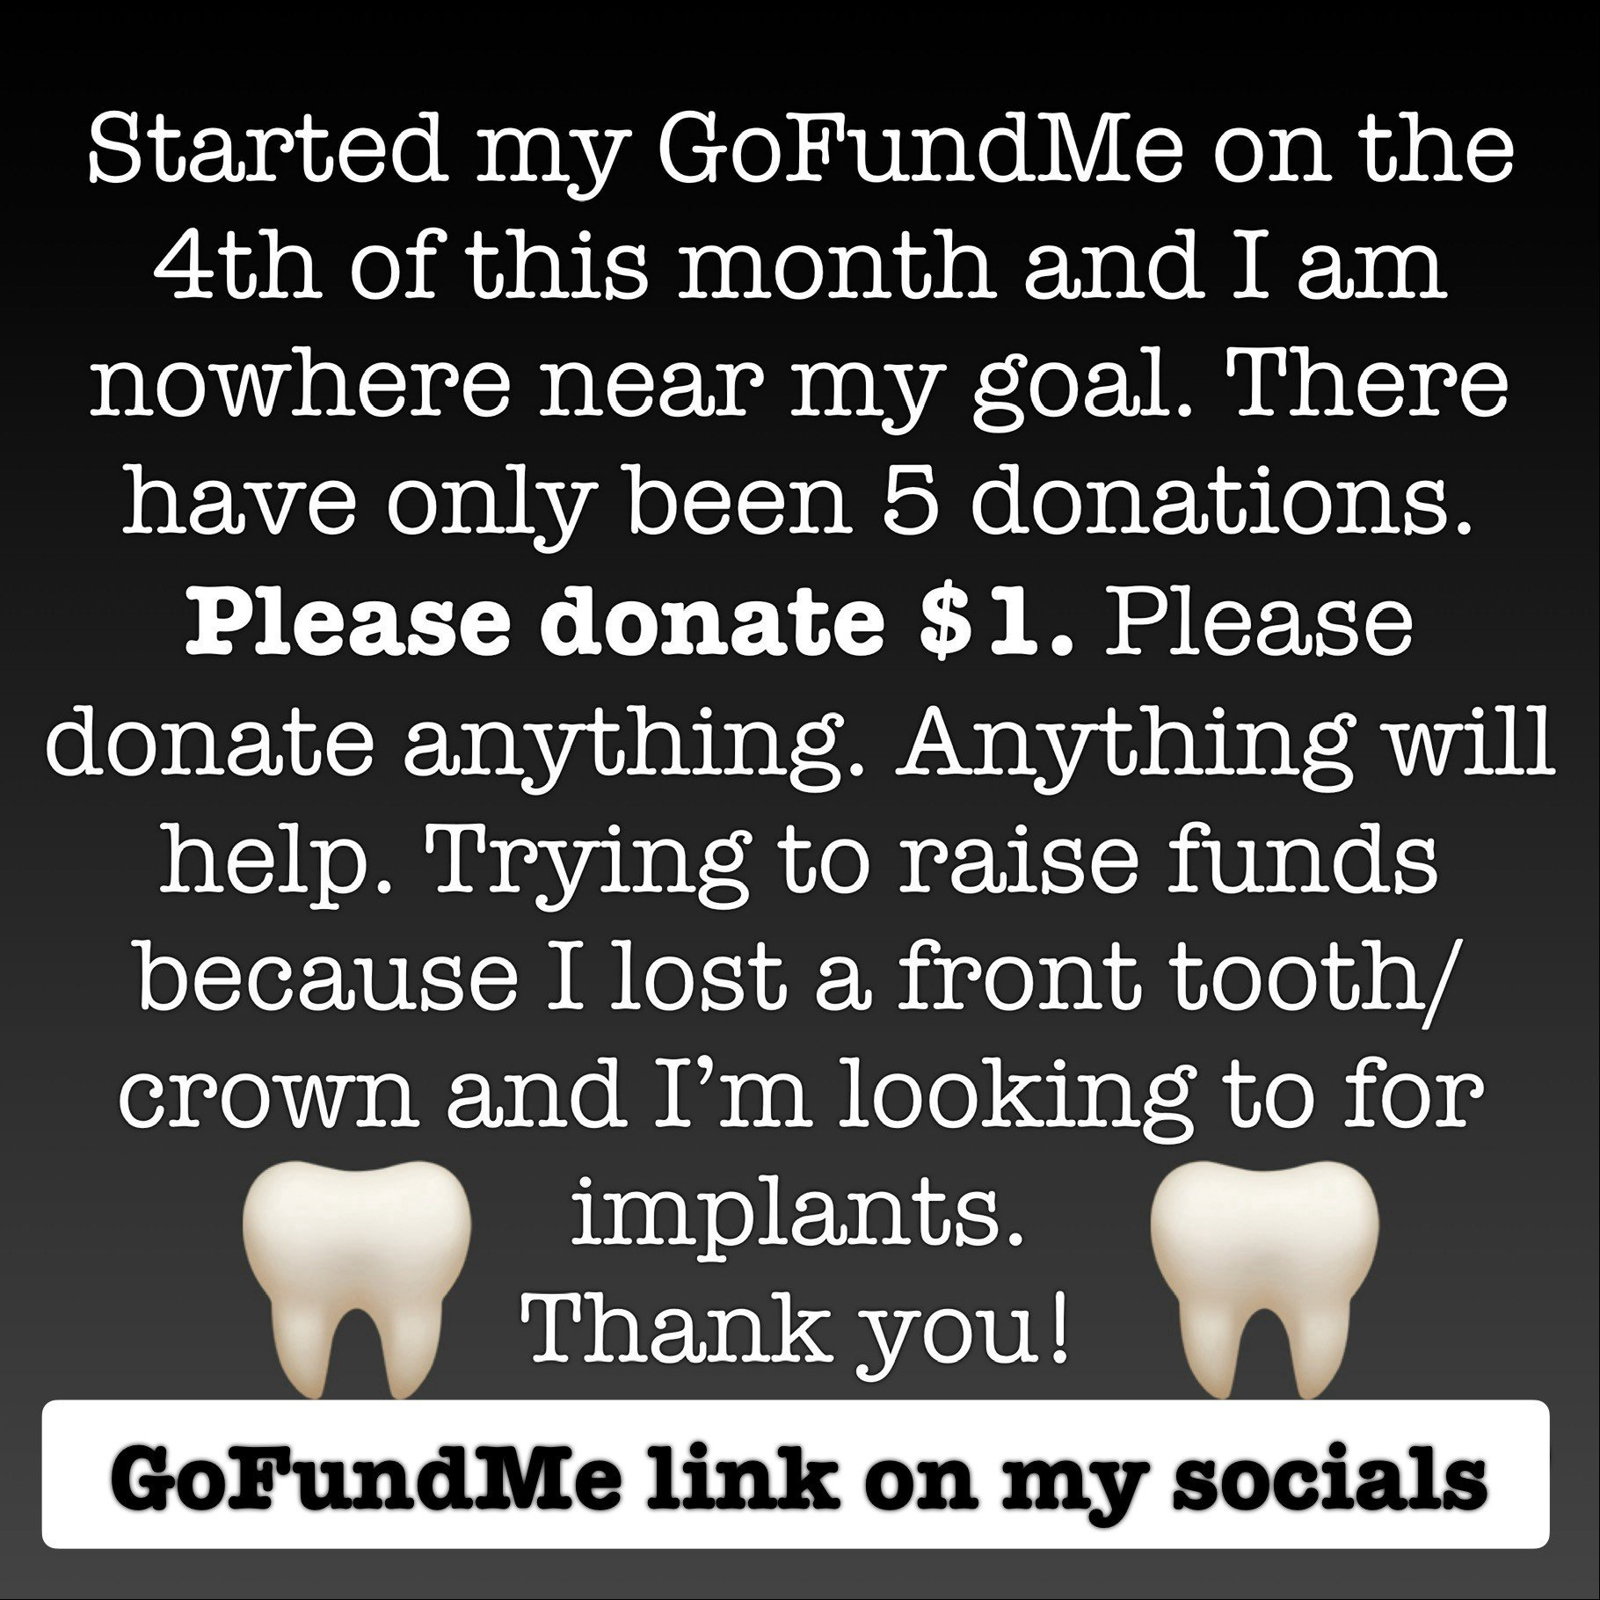 Photo by IG@36ddds with the username @averyhornyvirgo, who is a star user,  April 19, 2024 at 9:17 AM and the text says 'Started my GoFundMe on the 4th of this month and I am nowhere near my goal. There have only been 5 donations. Please donate $1. Please donate anything. Anything will help. Trying to raise funds because I lost a front tooth/crown and I’m looking to for..'